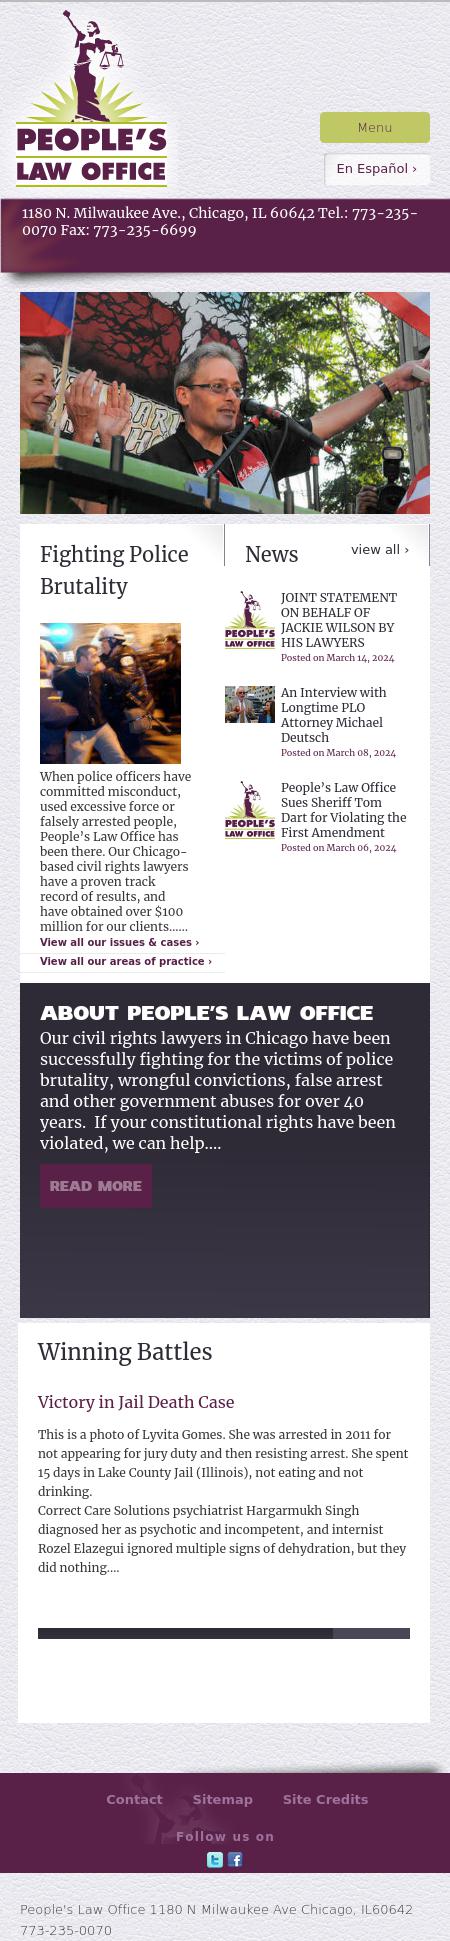 People's Law Office - Chicago IL Lawyers